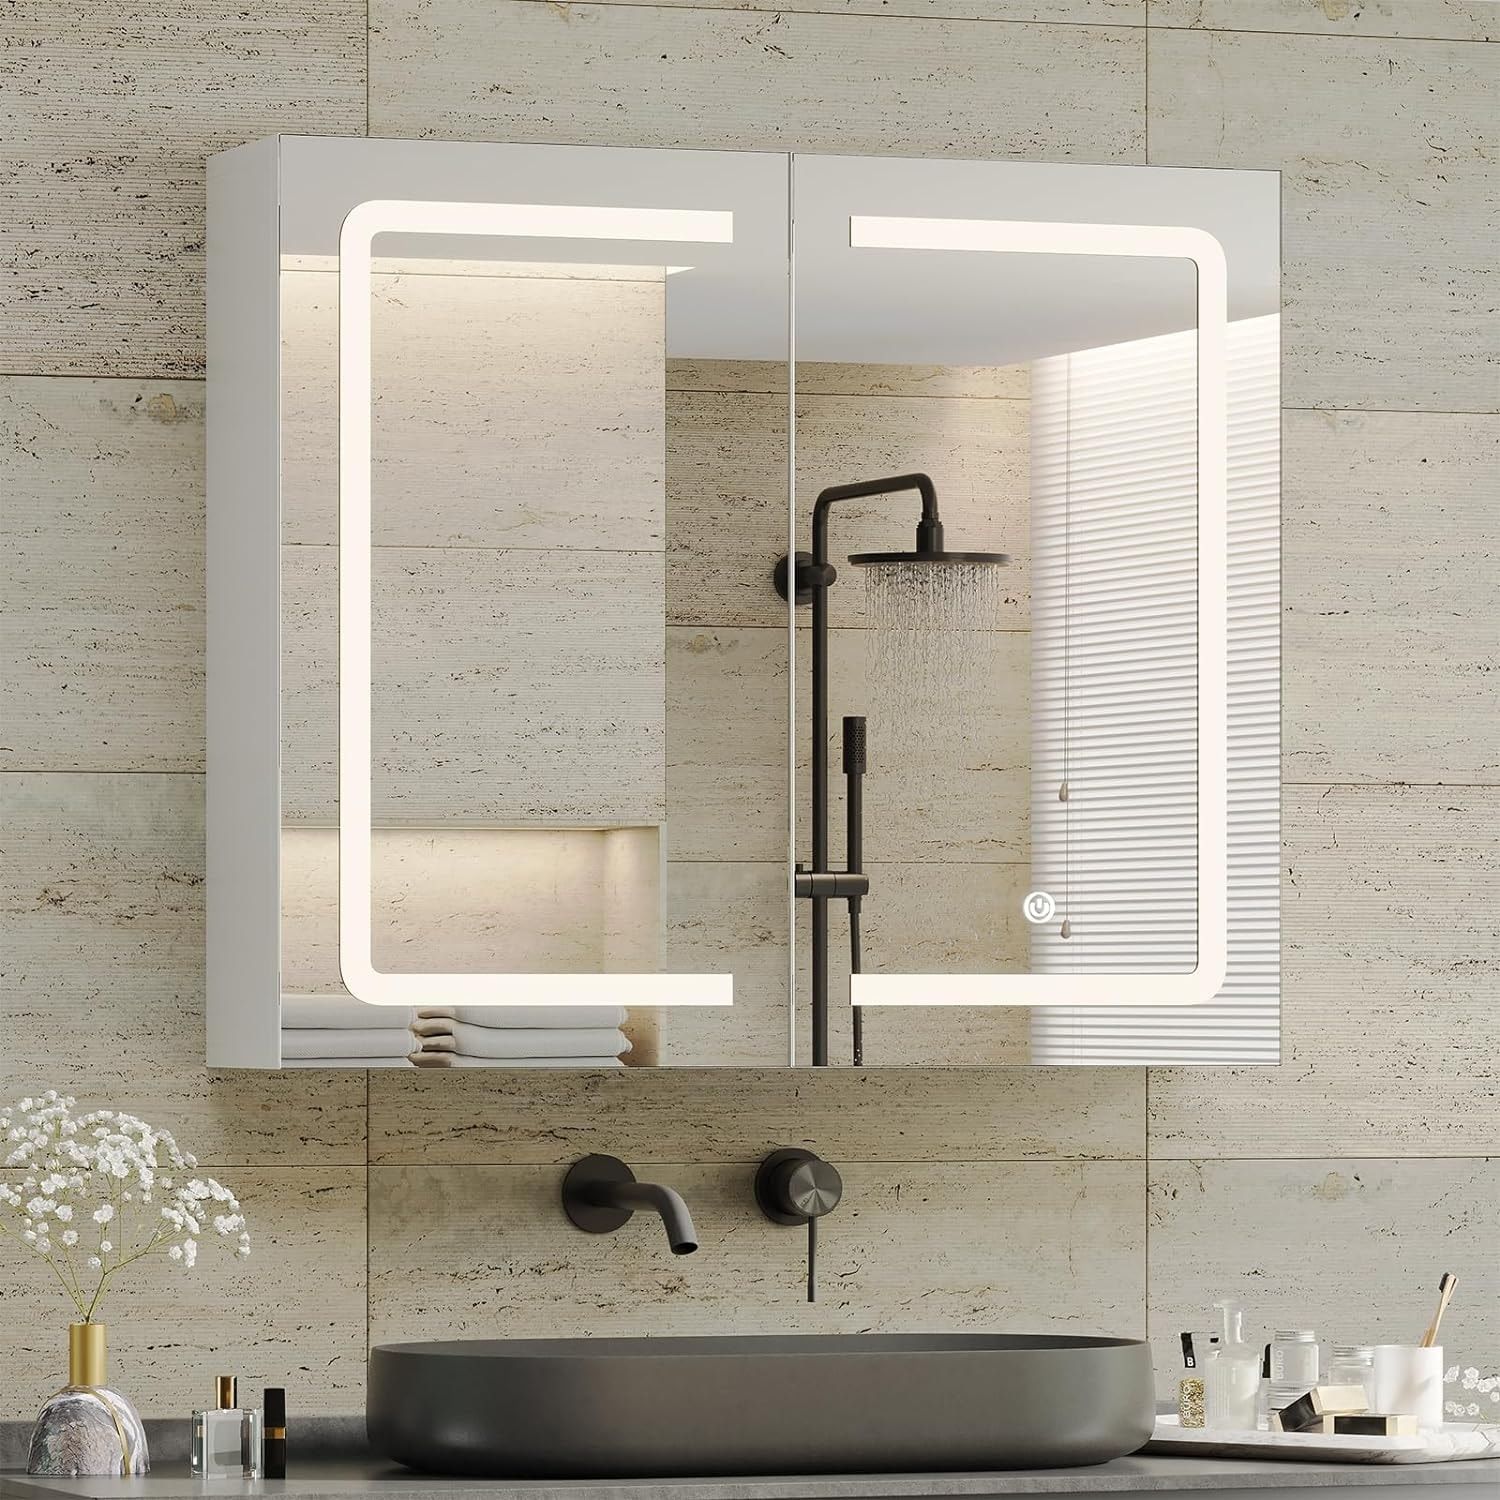 Illuminate Your Morning Routine: The Best Bathroom Medicine Cabinets With Lights